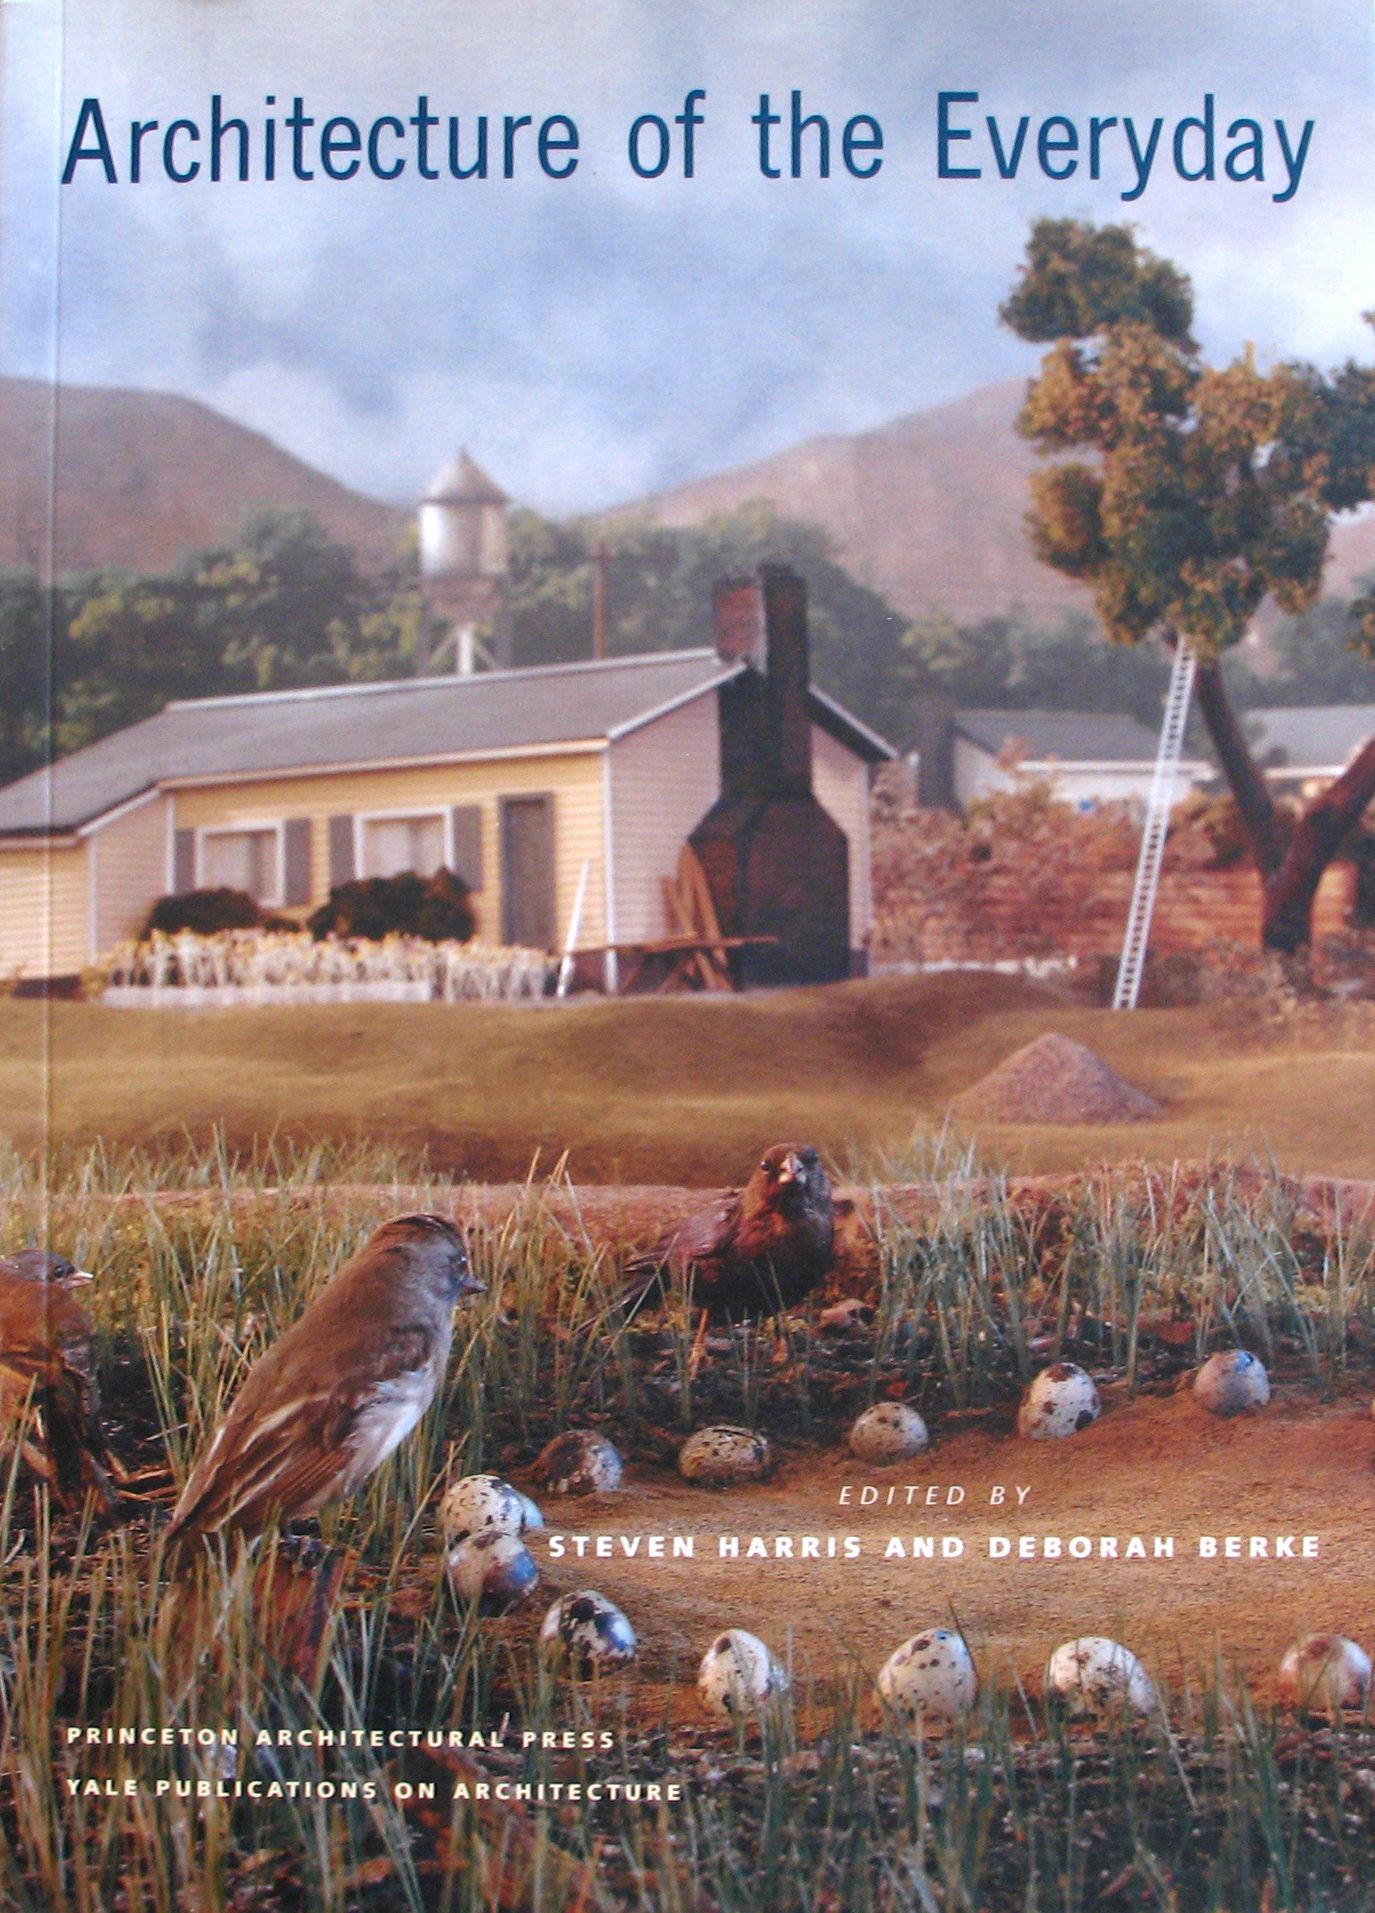 Cover of "Architecture of the Everyday" by Stven Harris and Deborah Berke.